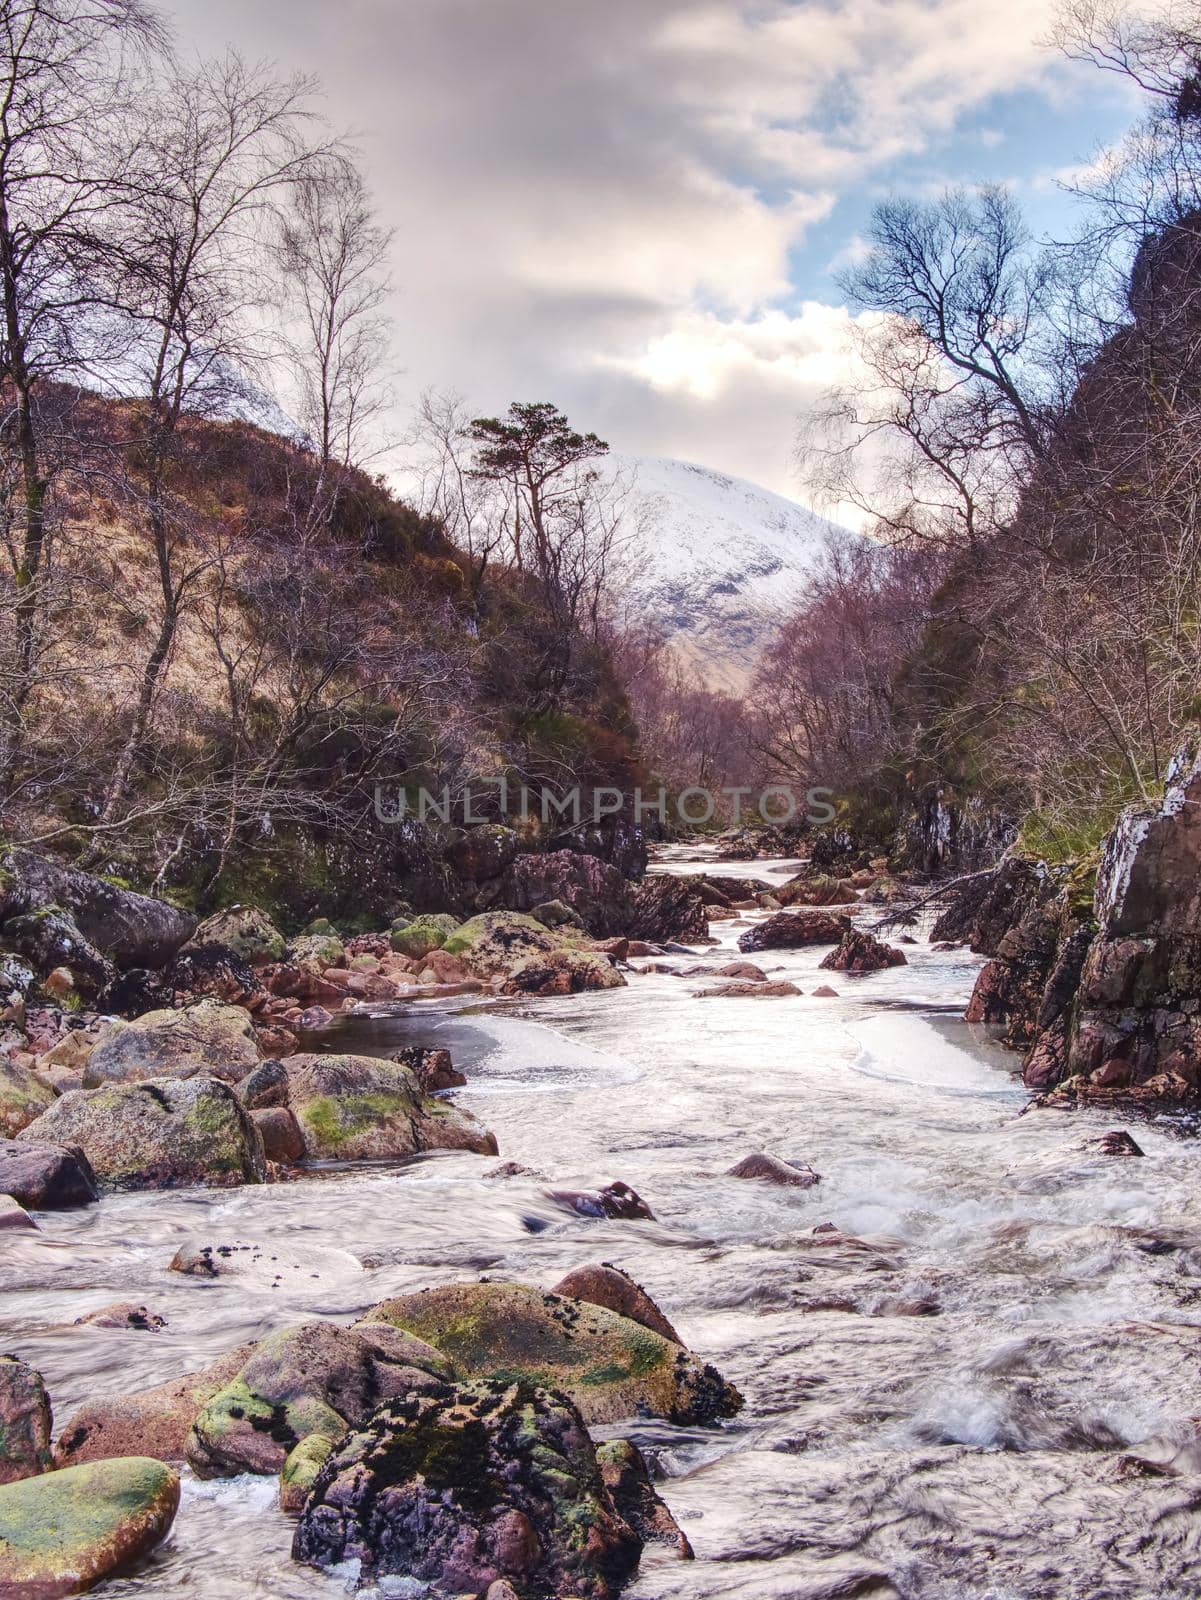 River at base of snowy mountains in Scottish Highlands near Glencoe  in winter. Cold windless winter morning